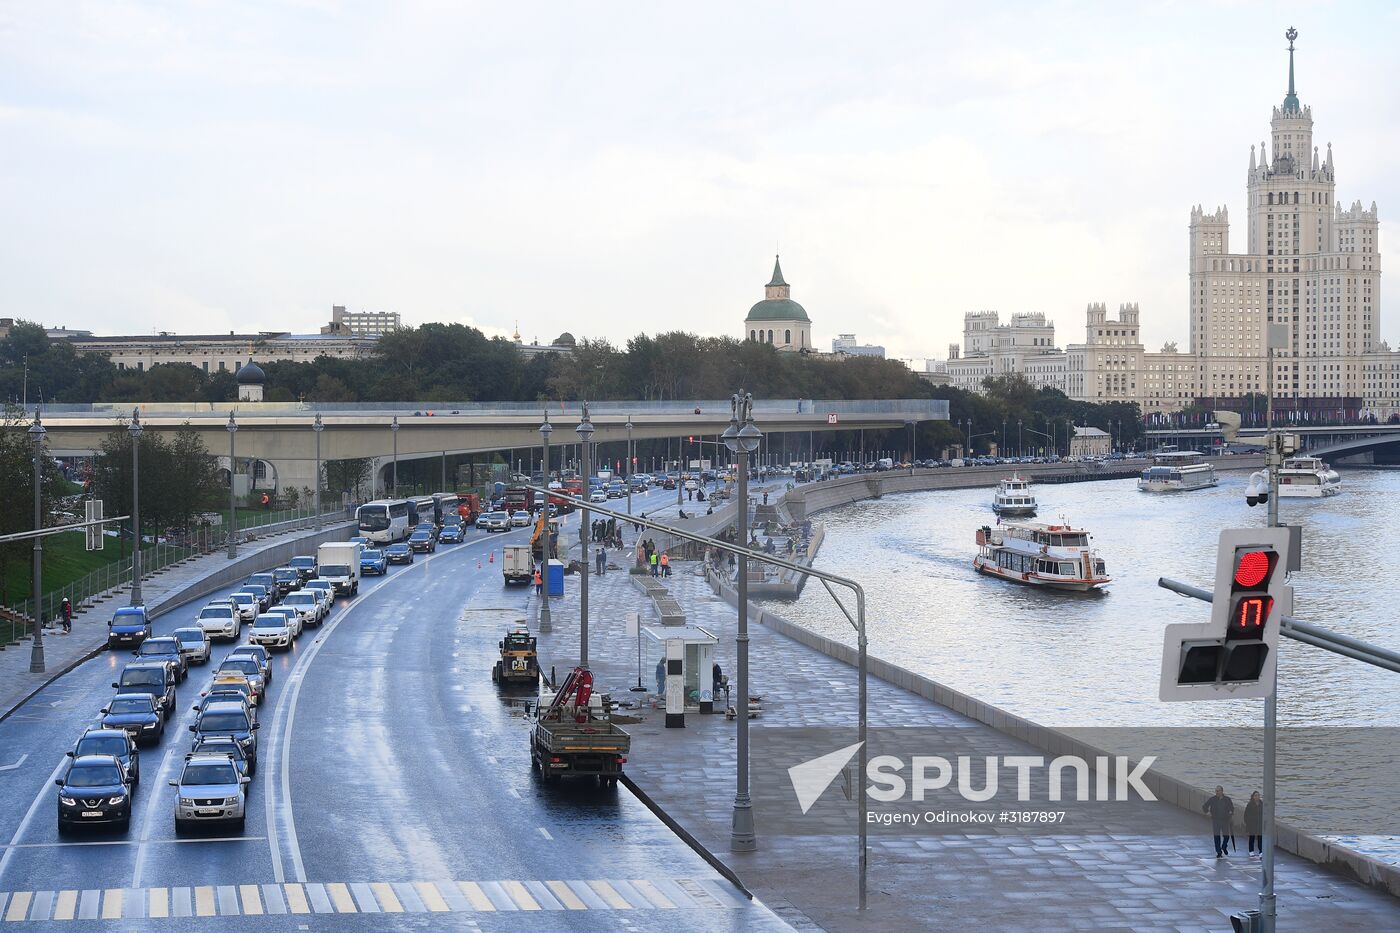 Moscow streets renovated